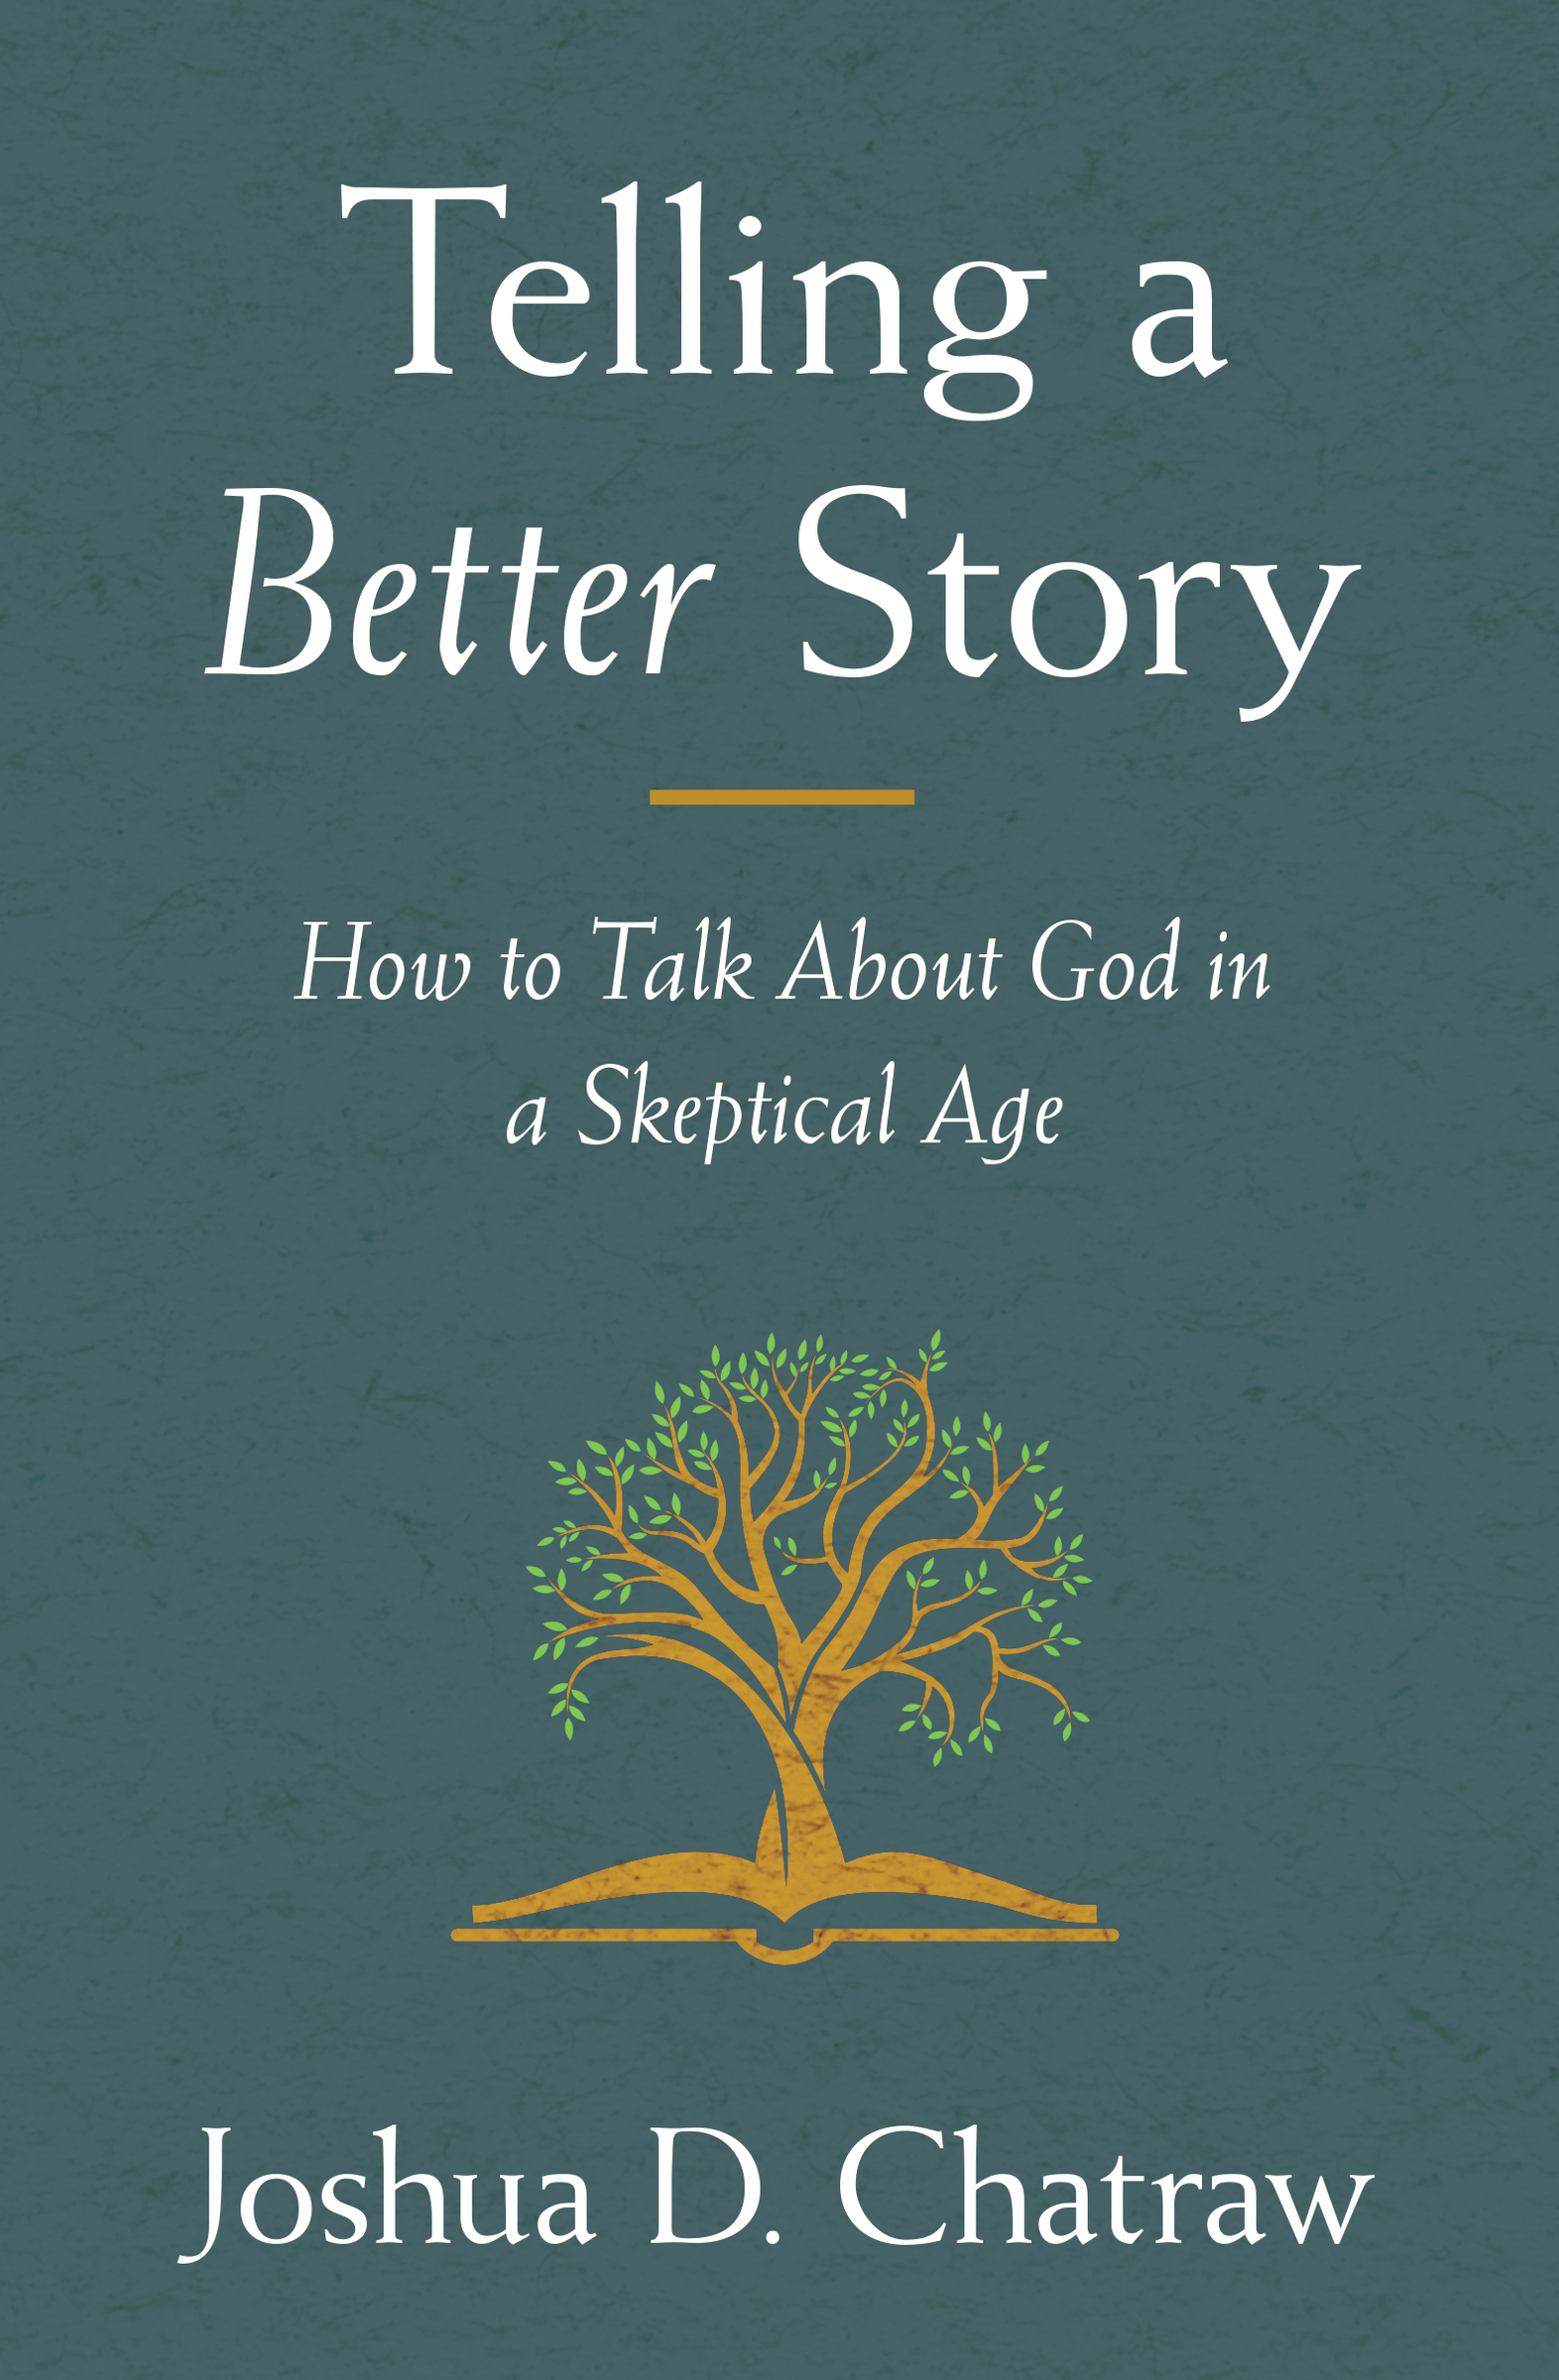 Telling a Better Story